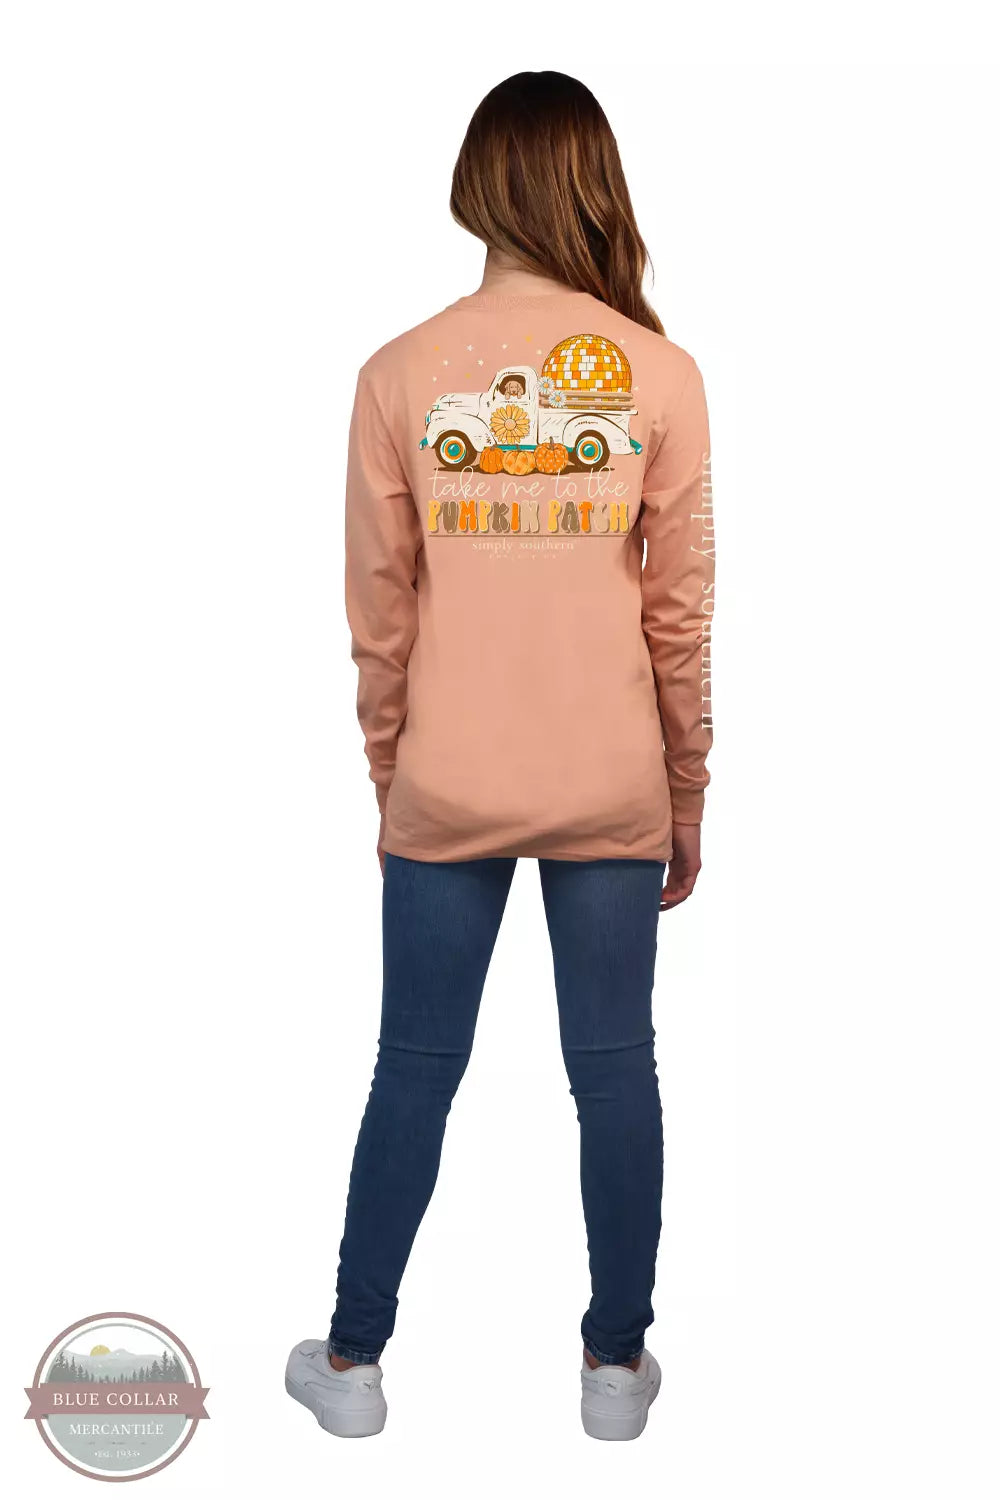 Simply Southern LS-TRUCK-CAFÉ Pumpkin Patch Long Sleeve T-Shirt in Cafe Full View